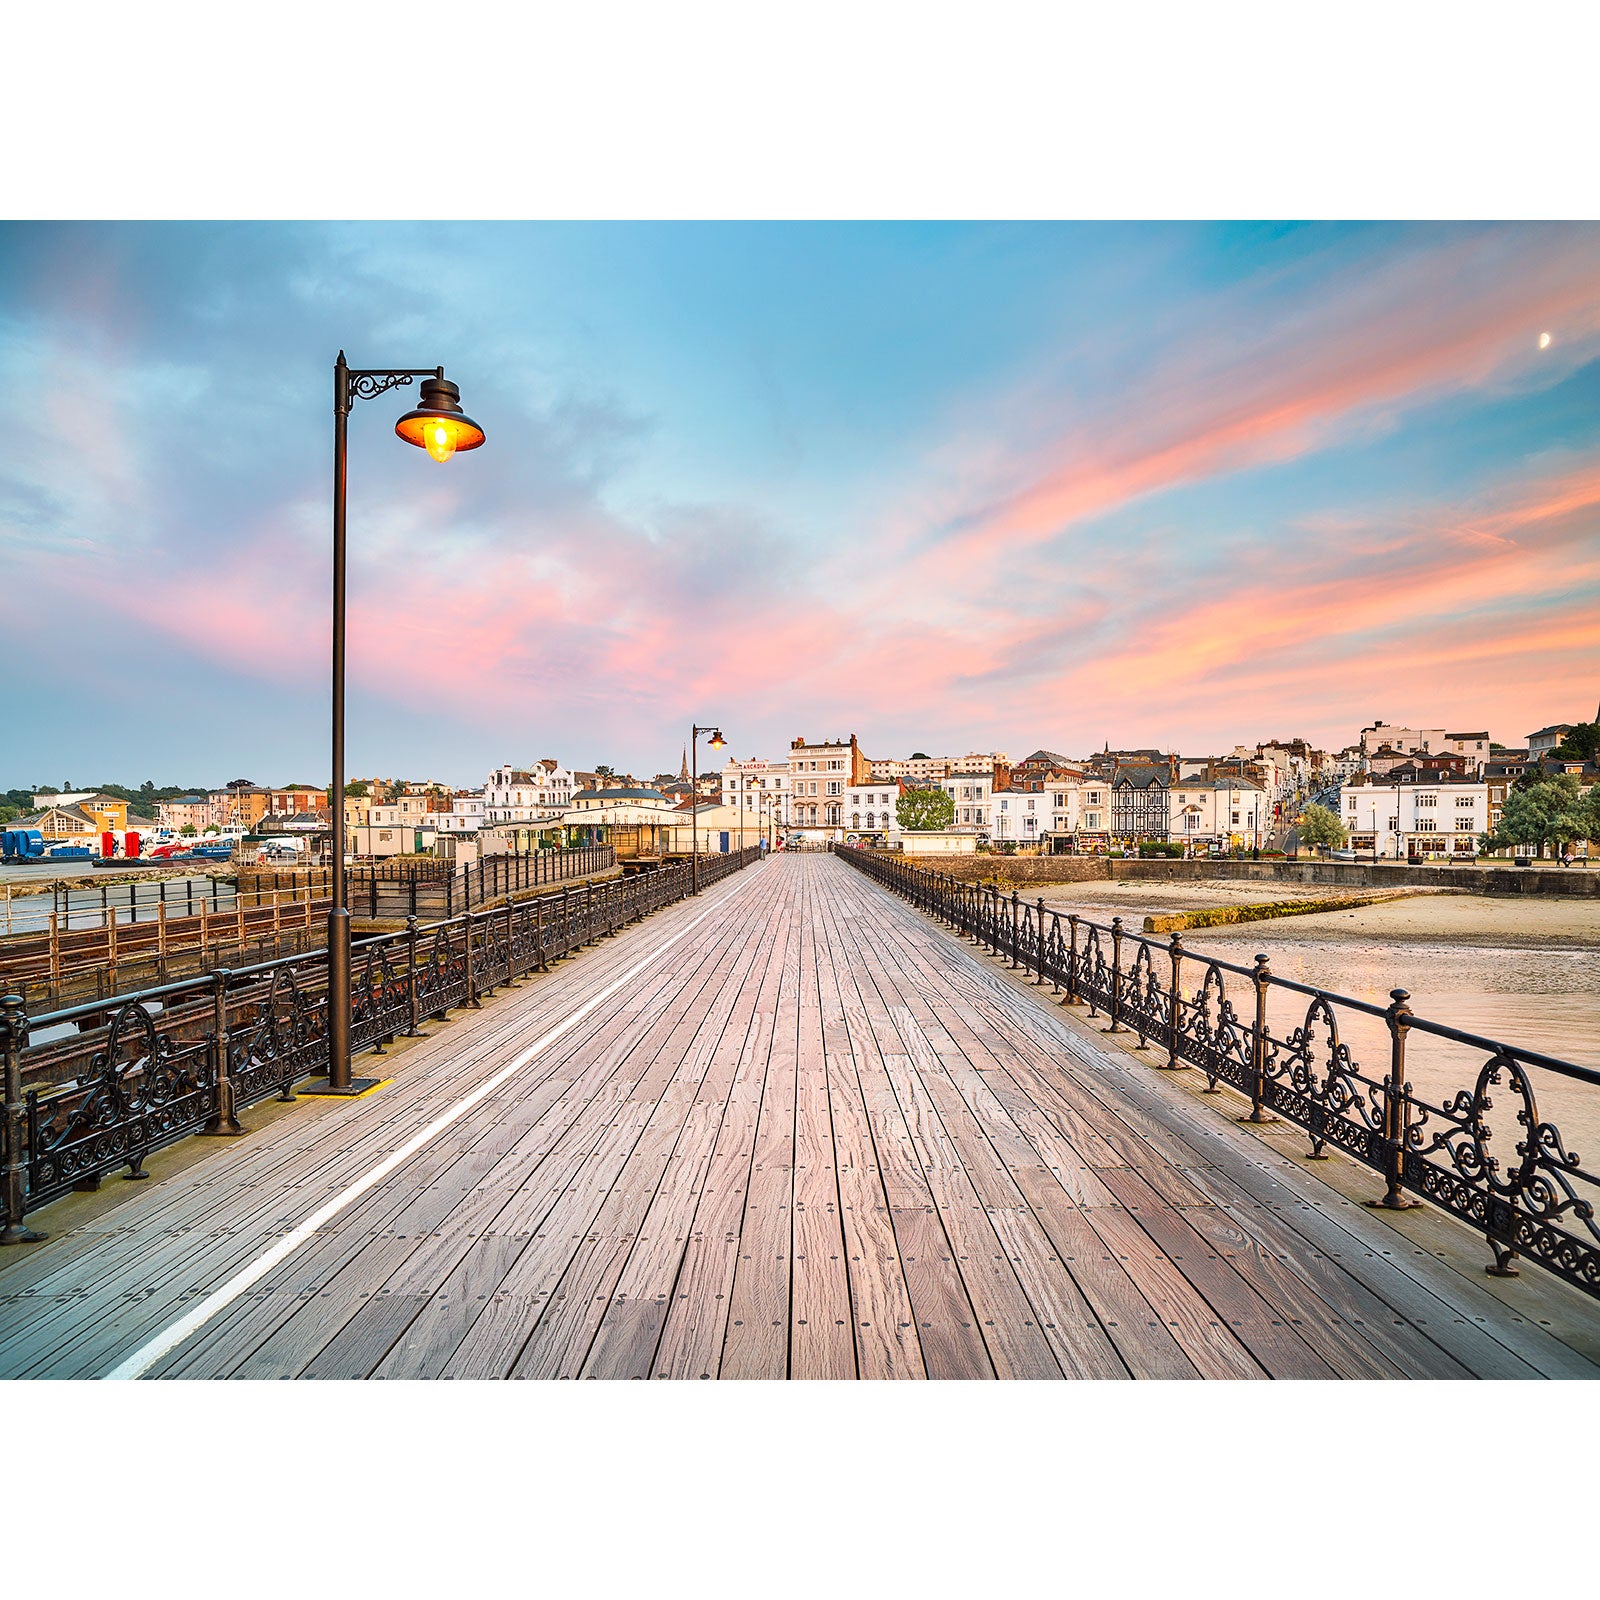 A Ryde Pier leading towards the Isle of Wight coastal town during a colorful sunset with street lamps and iron railings, captured by Available Light Photography.